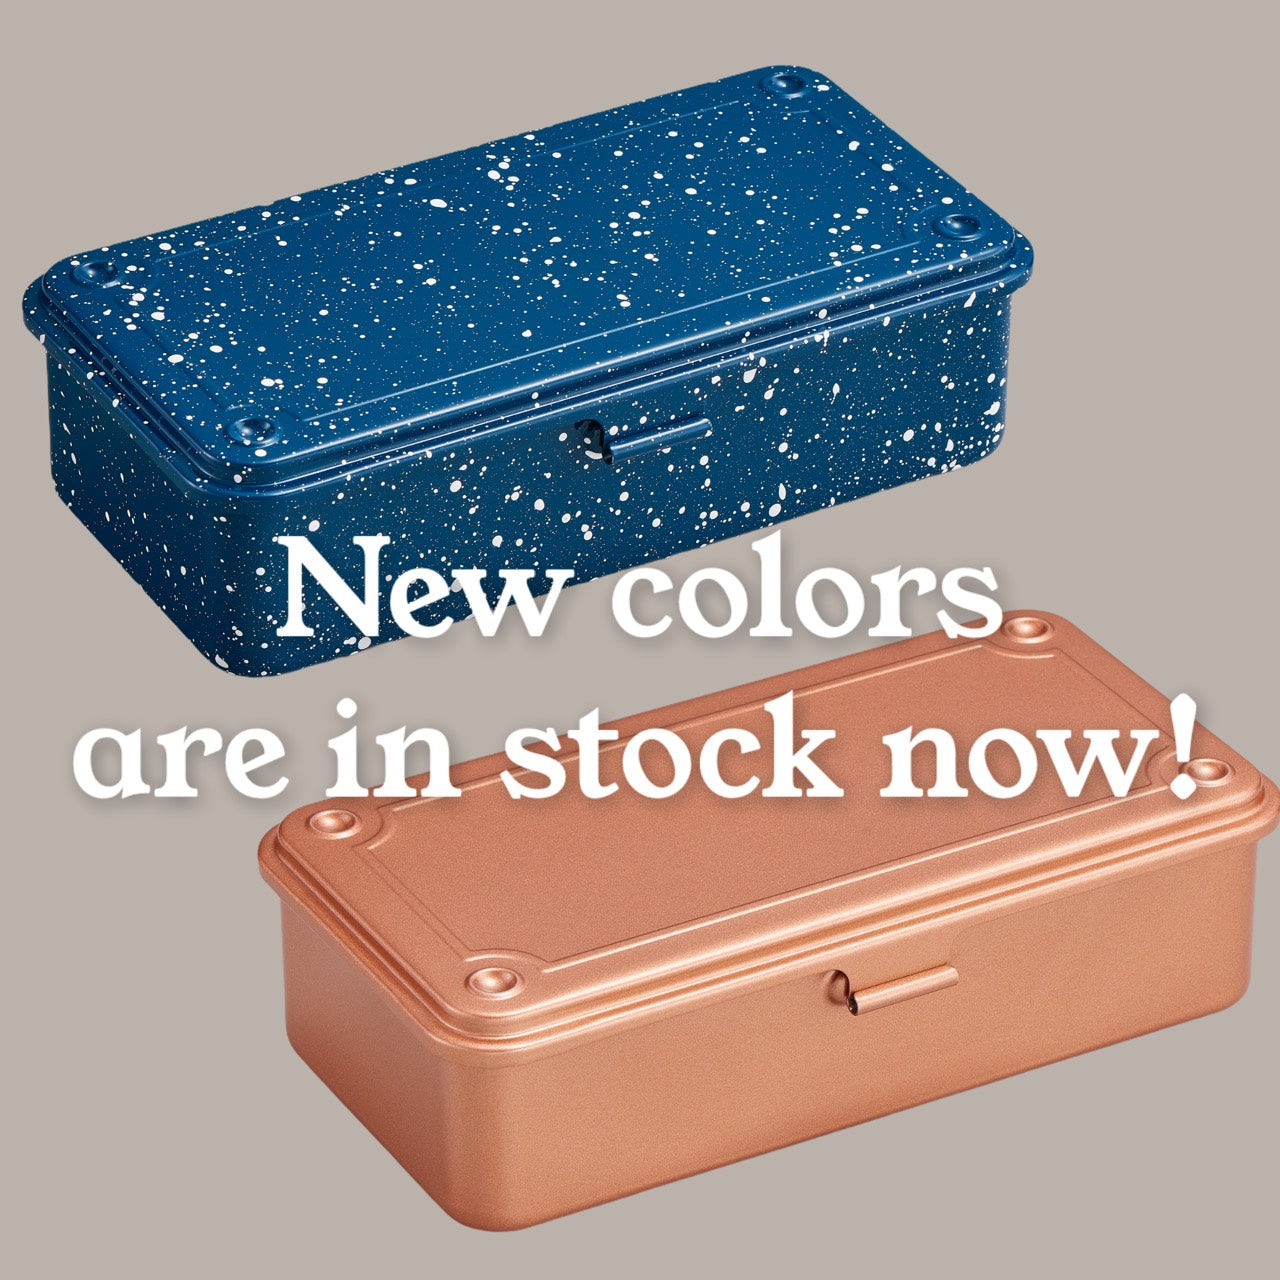 Welcome NEW COLORS!